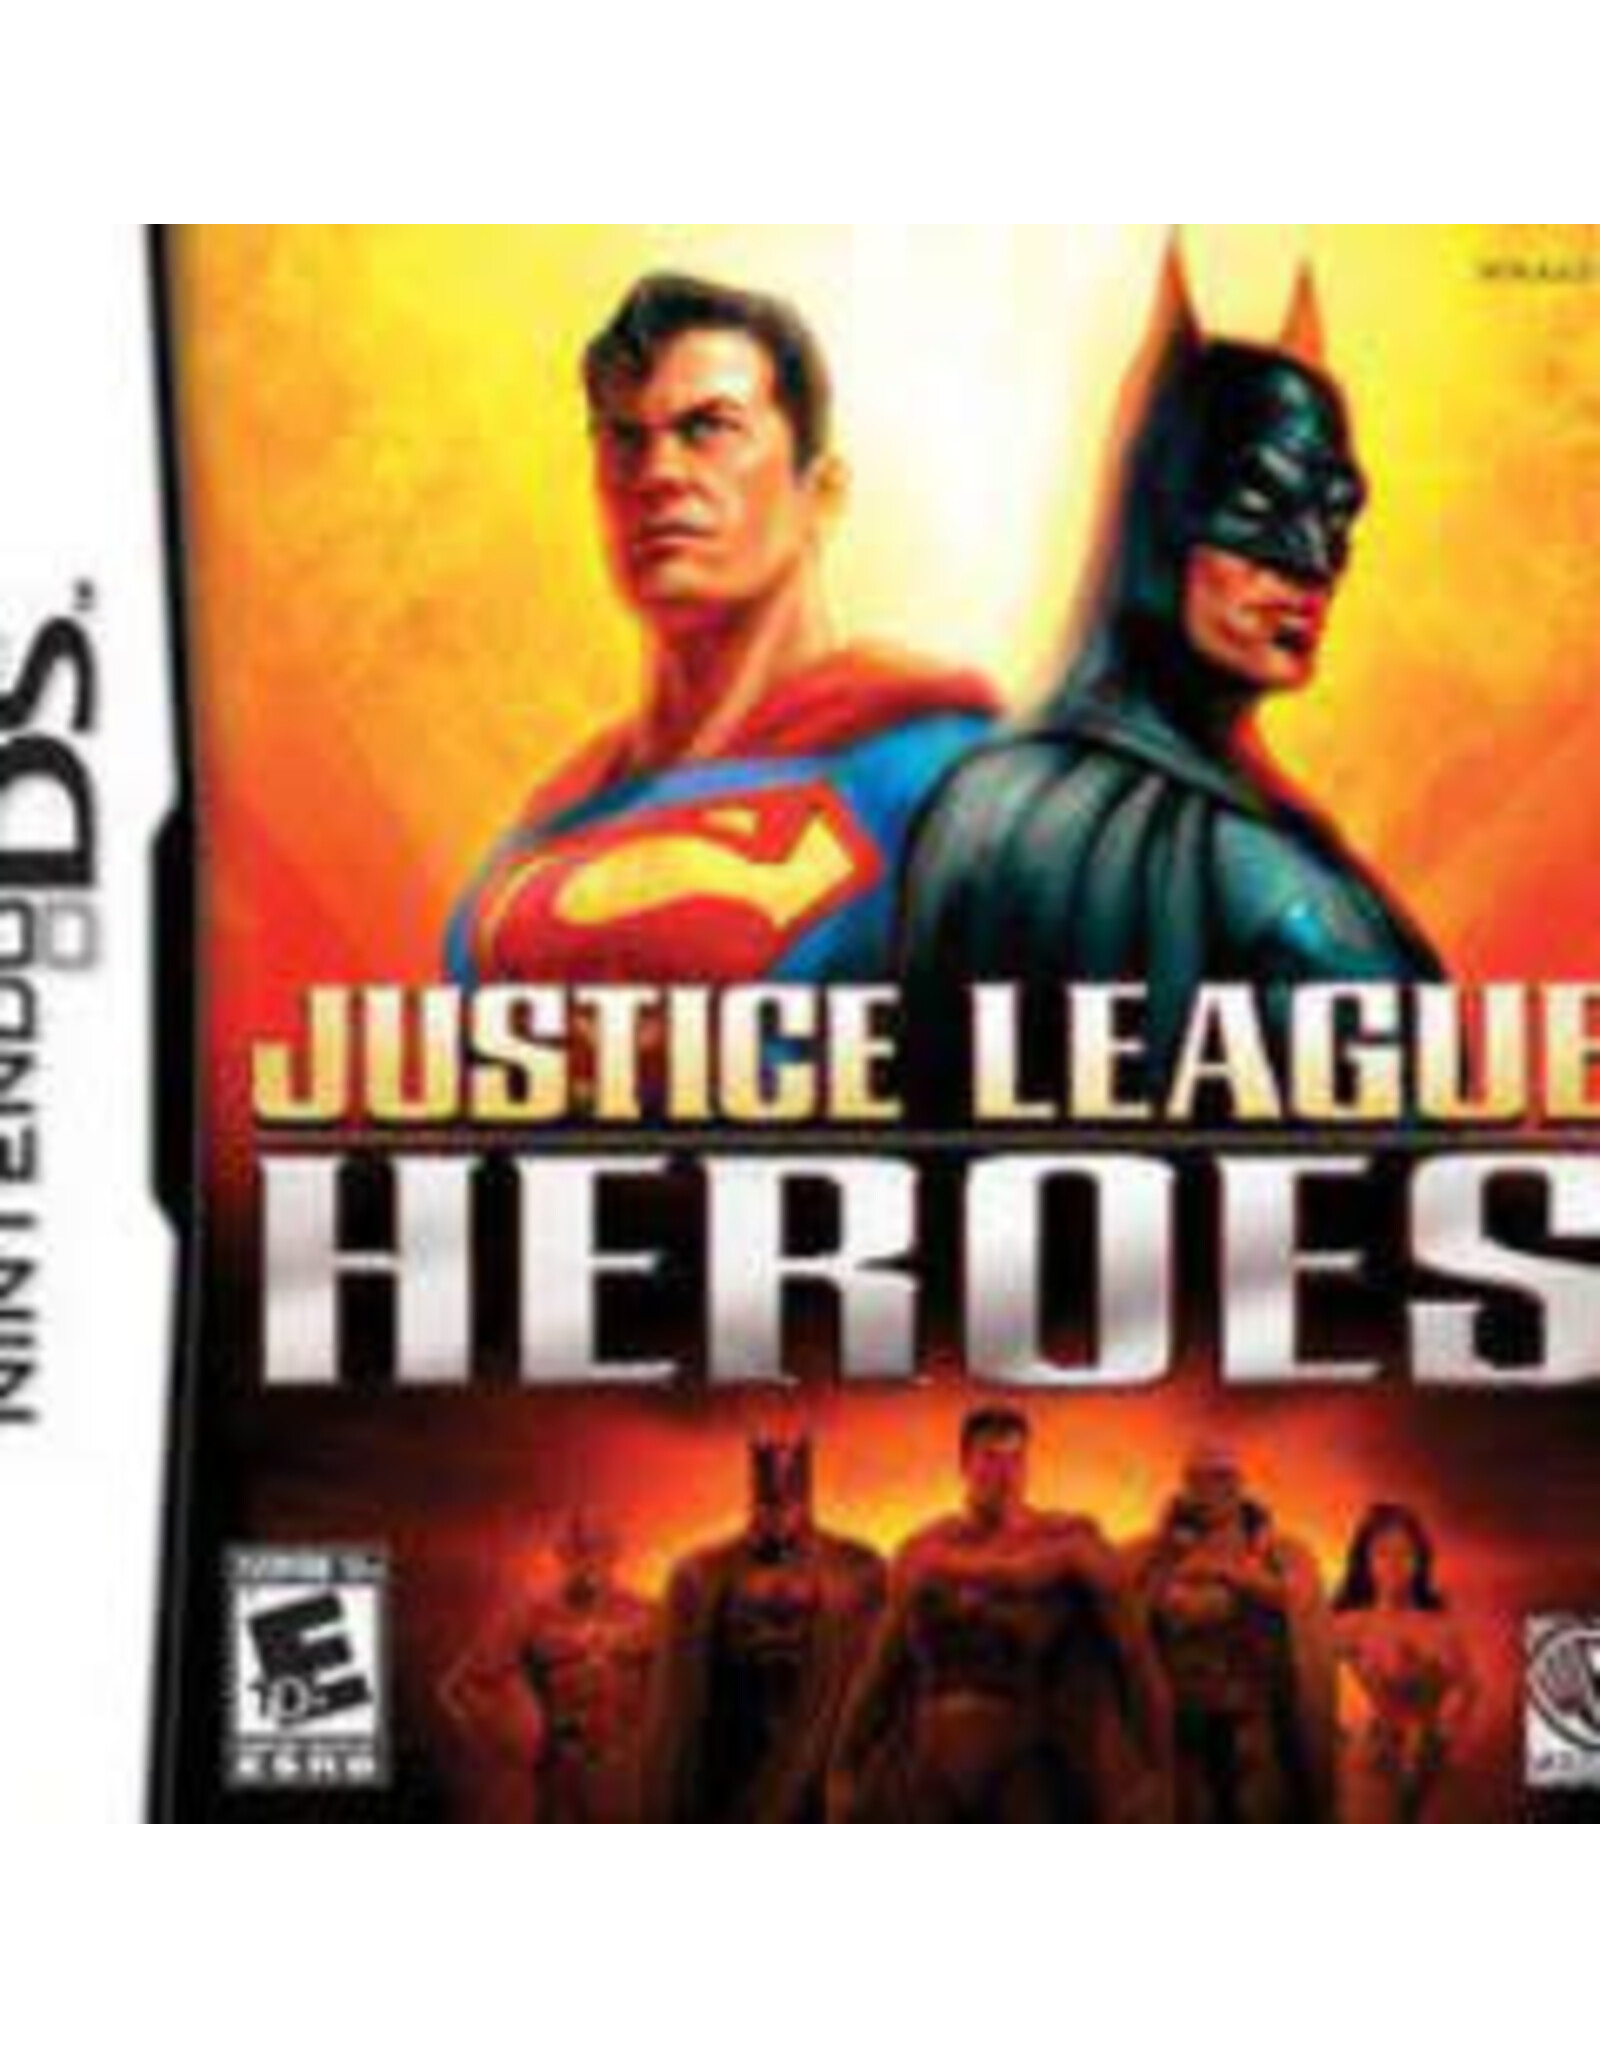 Nintendo DS Justice League Heroes (Cart Only)